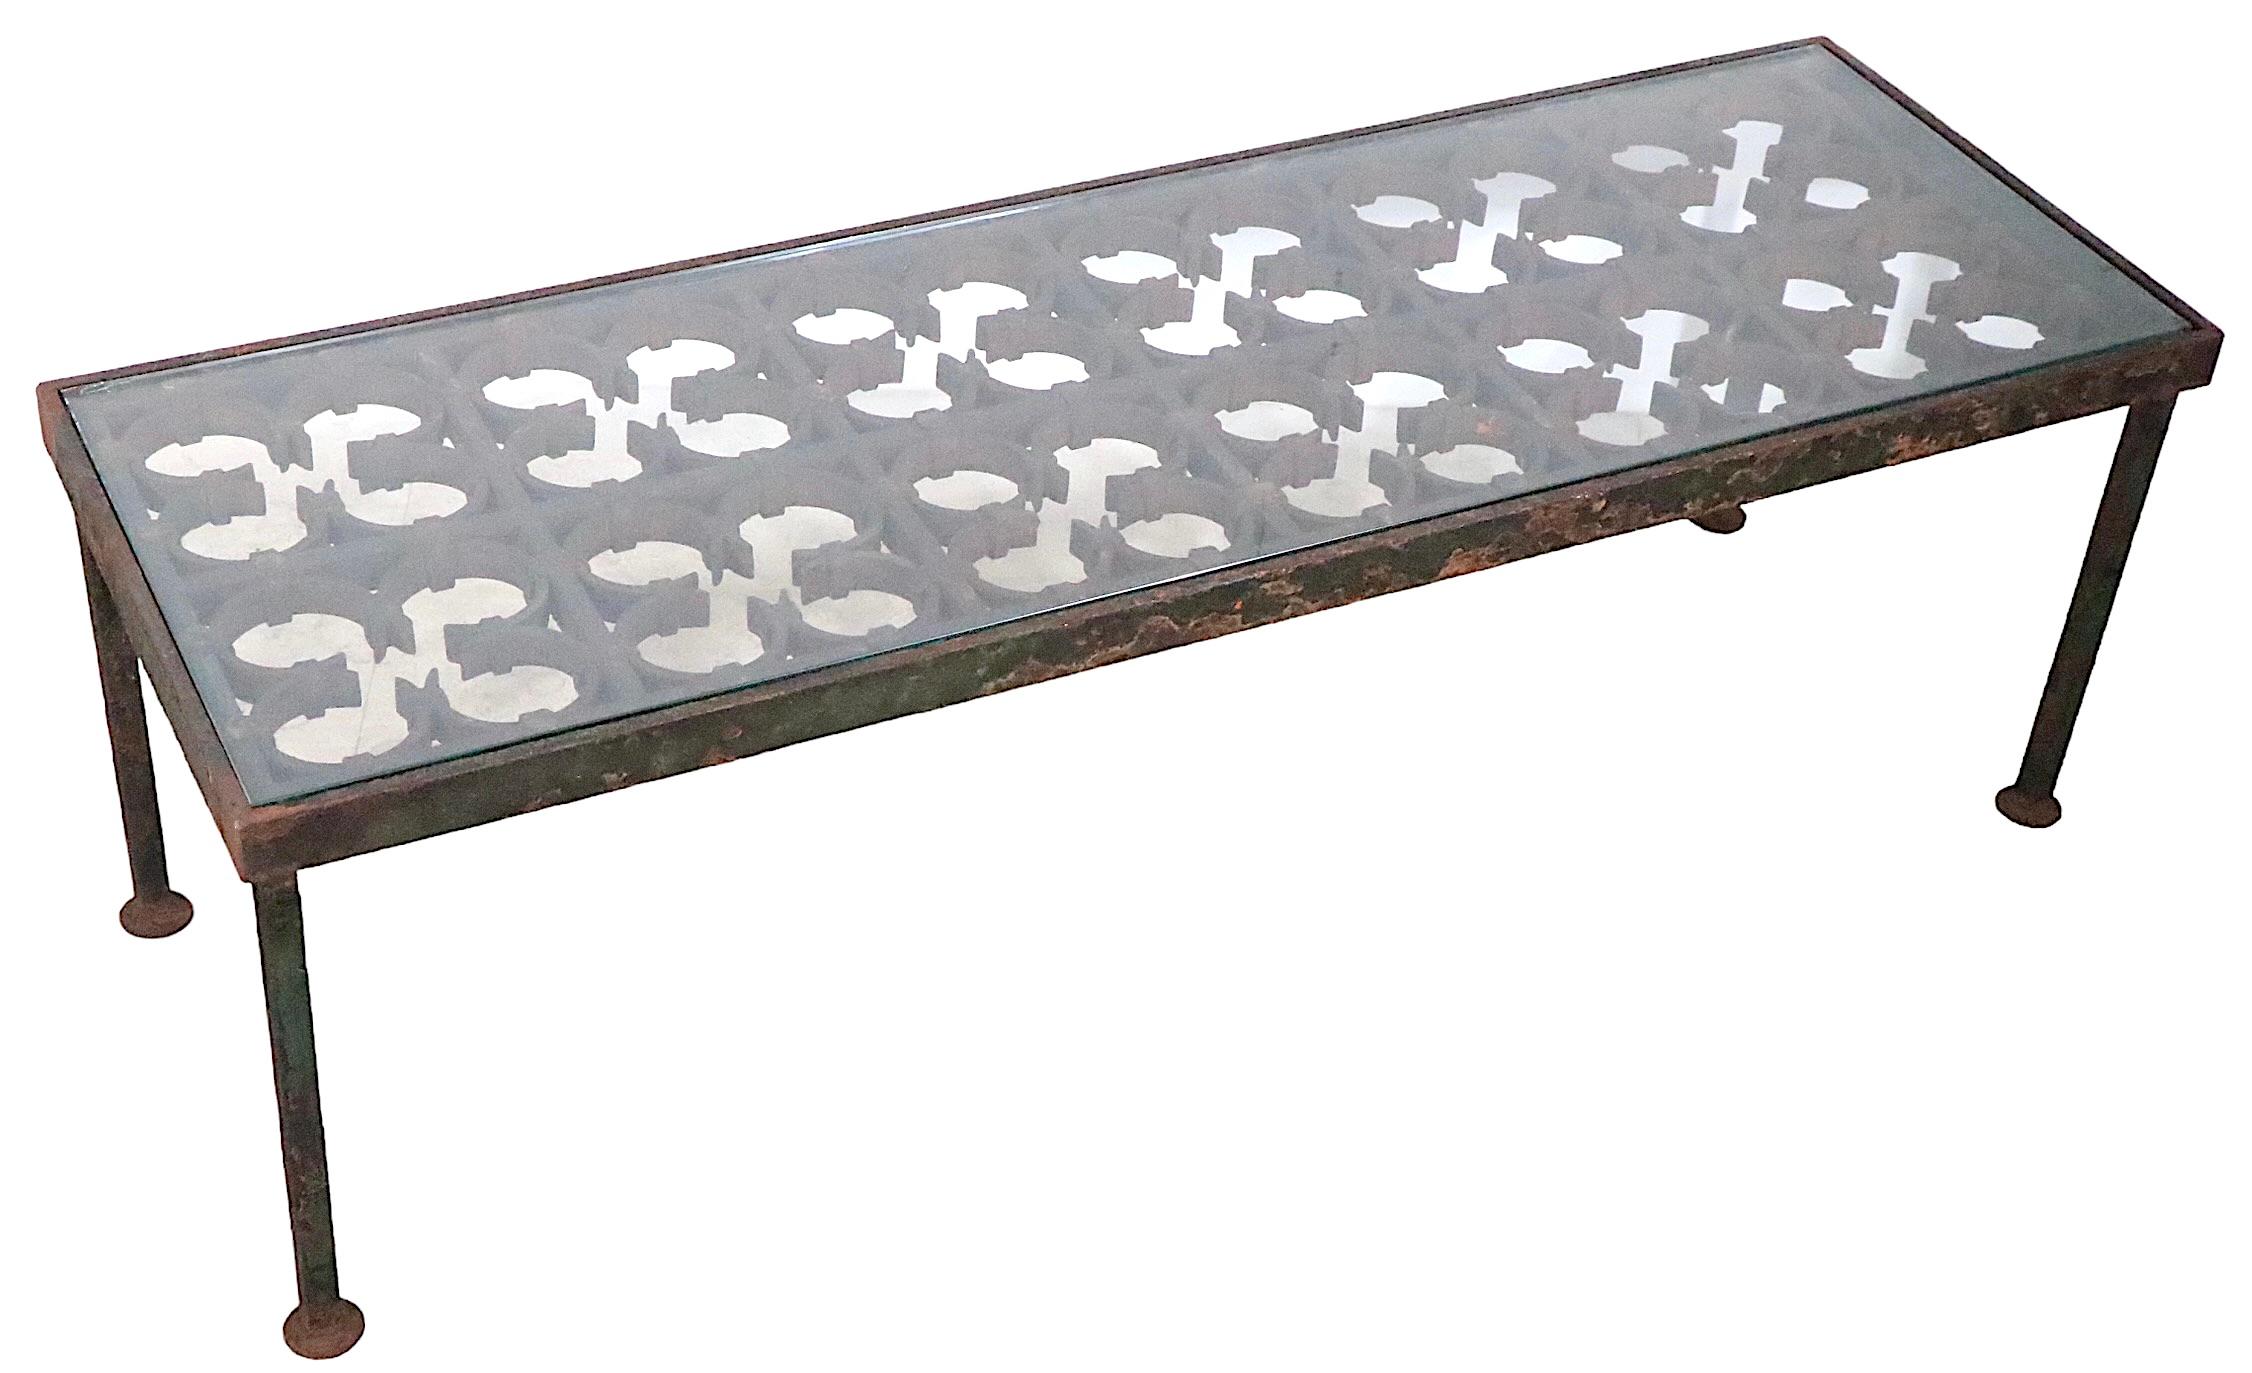 Iron and Glass Coffee Table created from a decorative  architectural iron panel 1